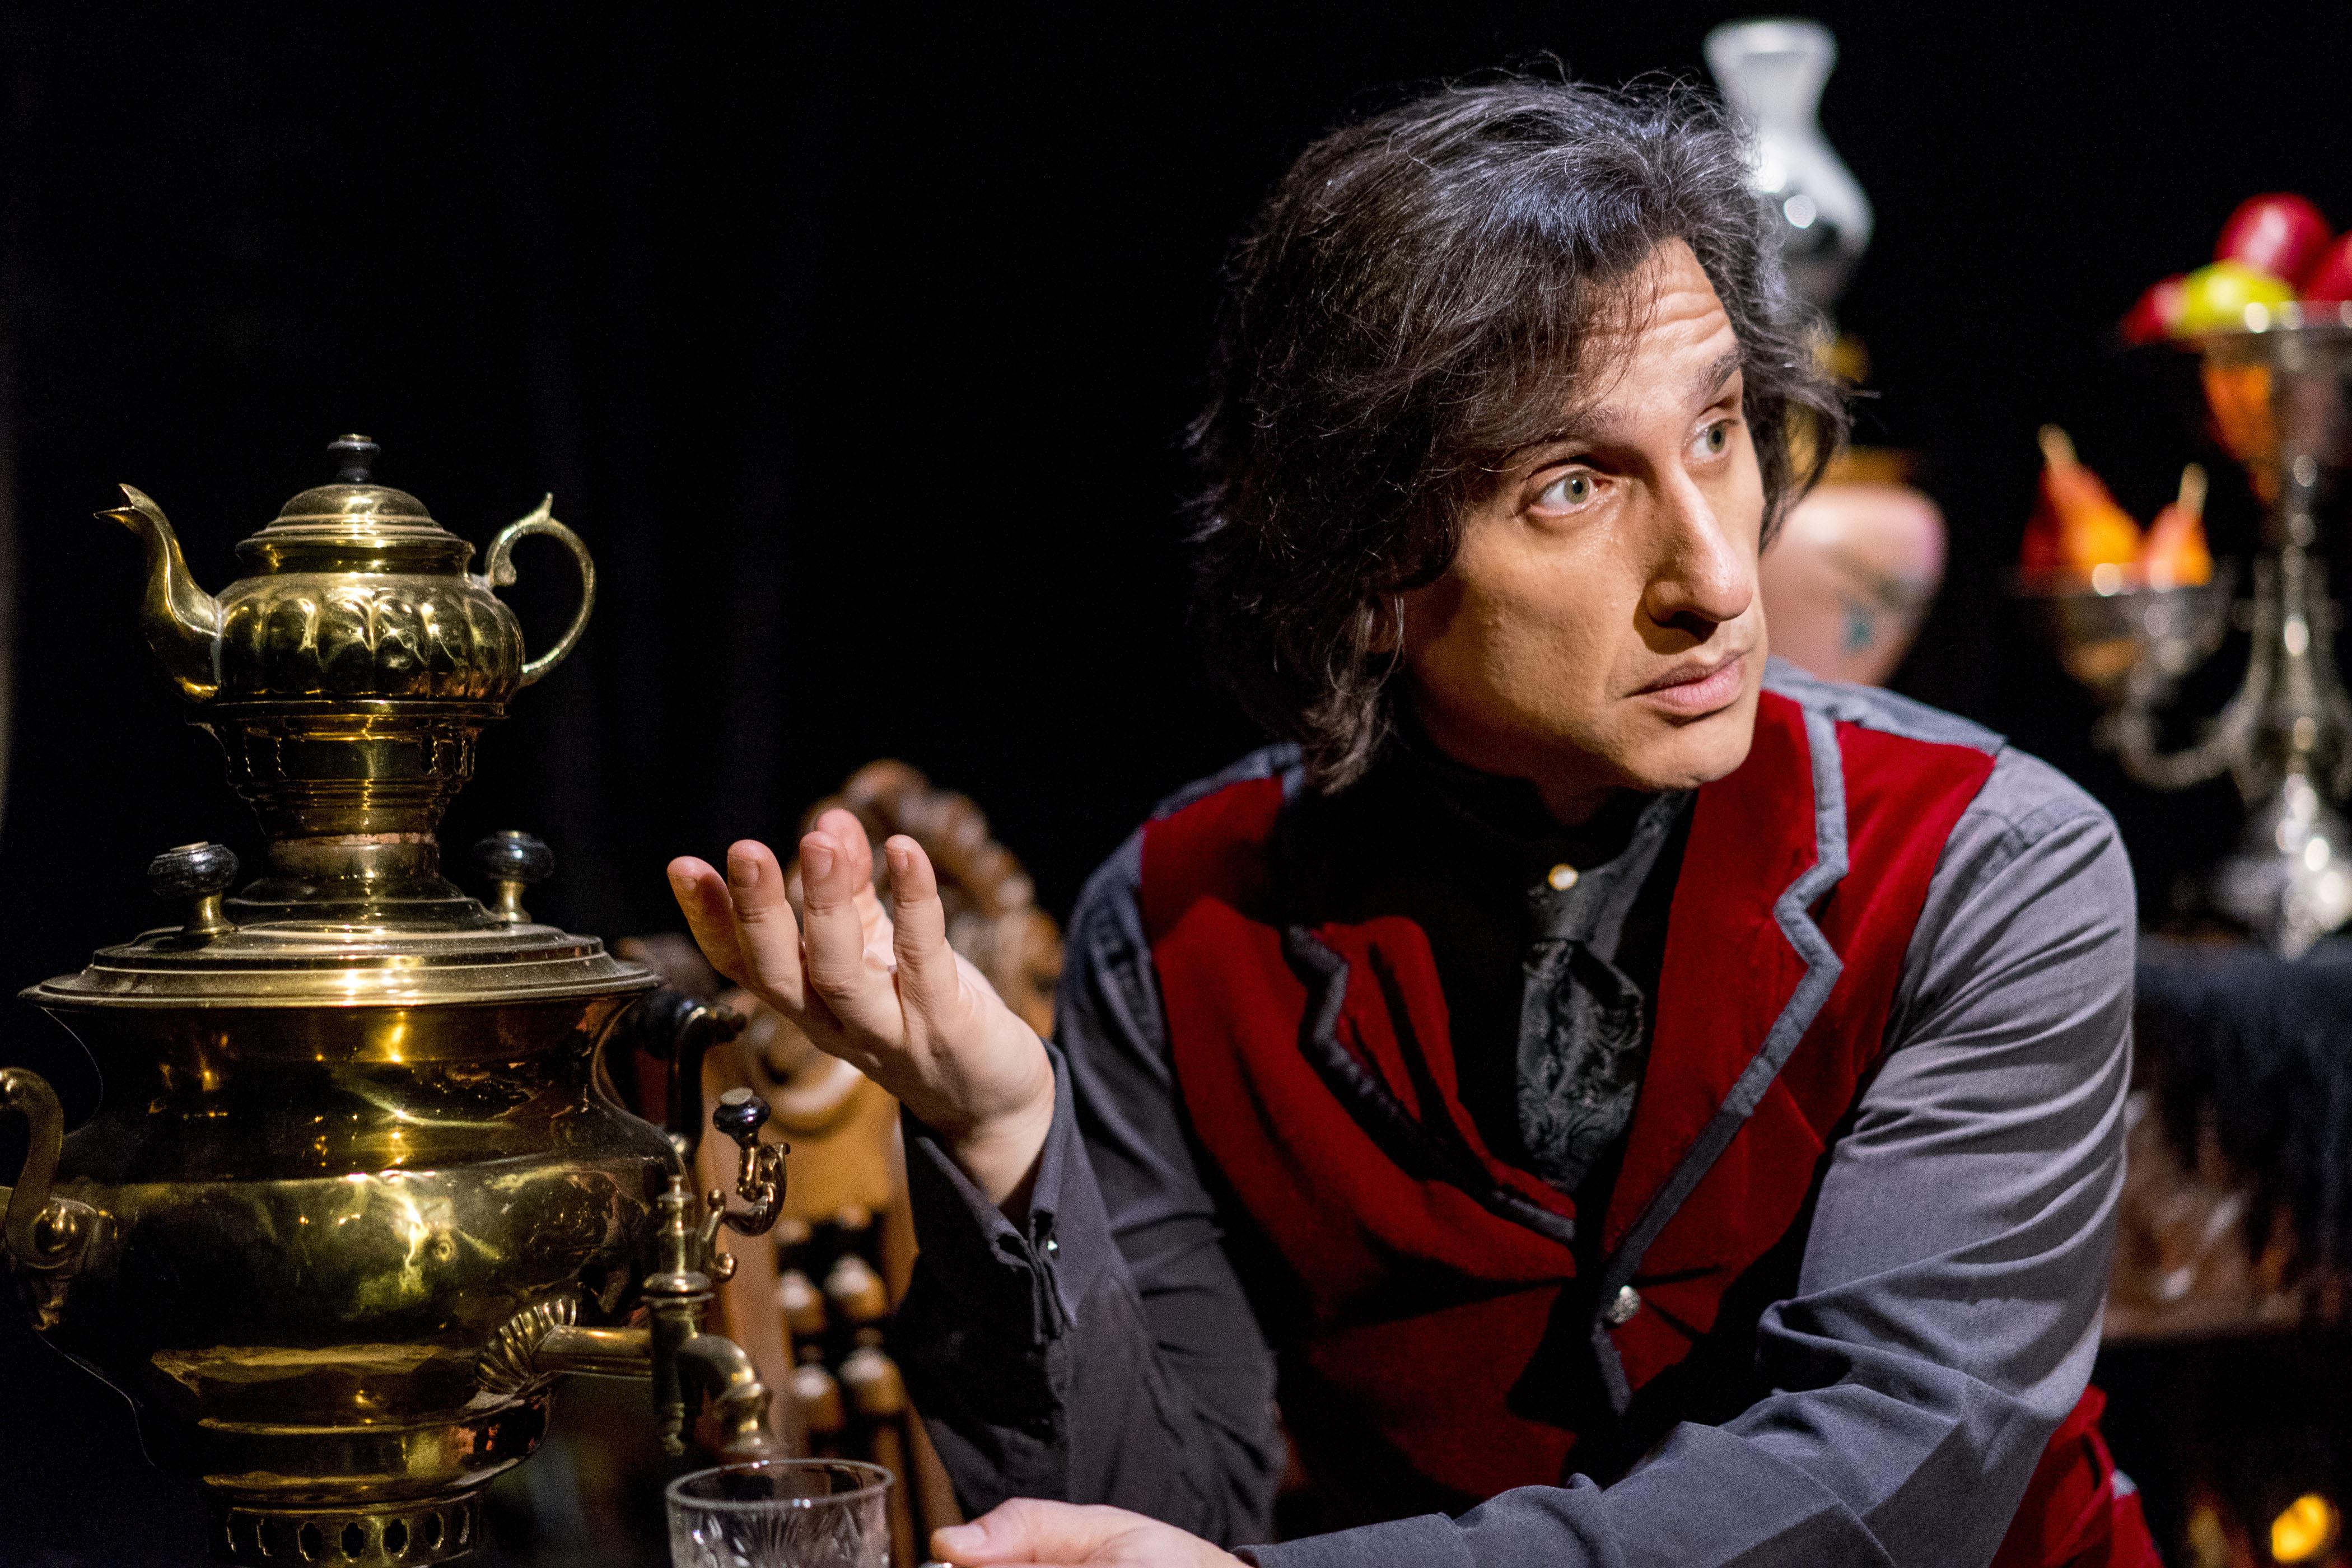 Hershey Felder in “Our Great Tchaikovsky” at Steppenwolf Upstairs Theatre.